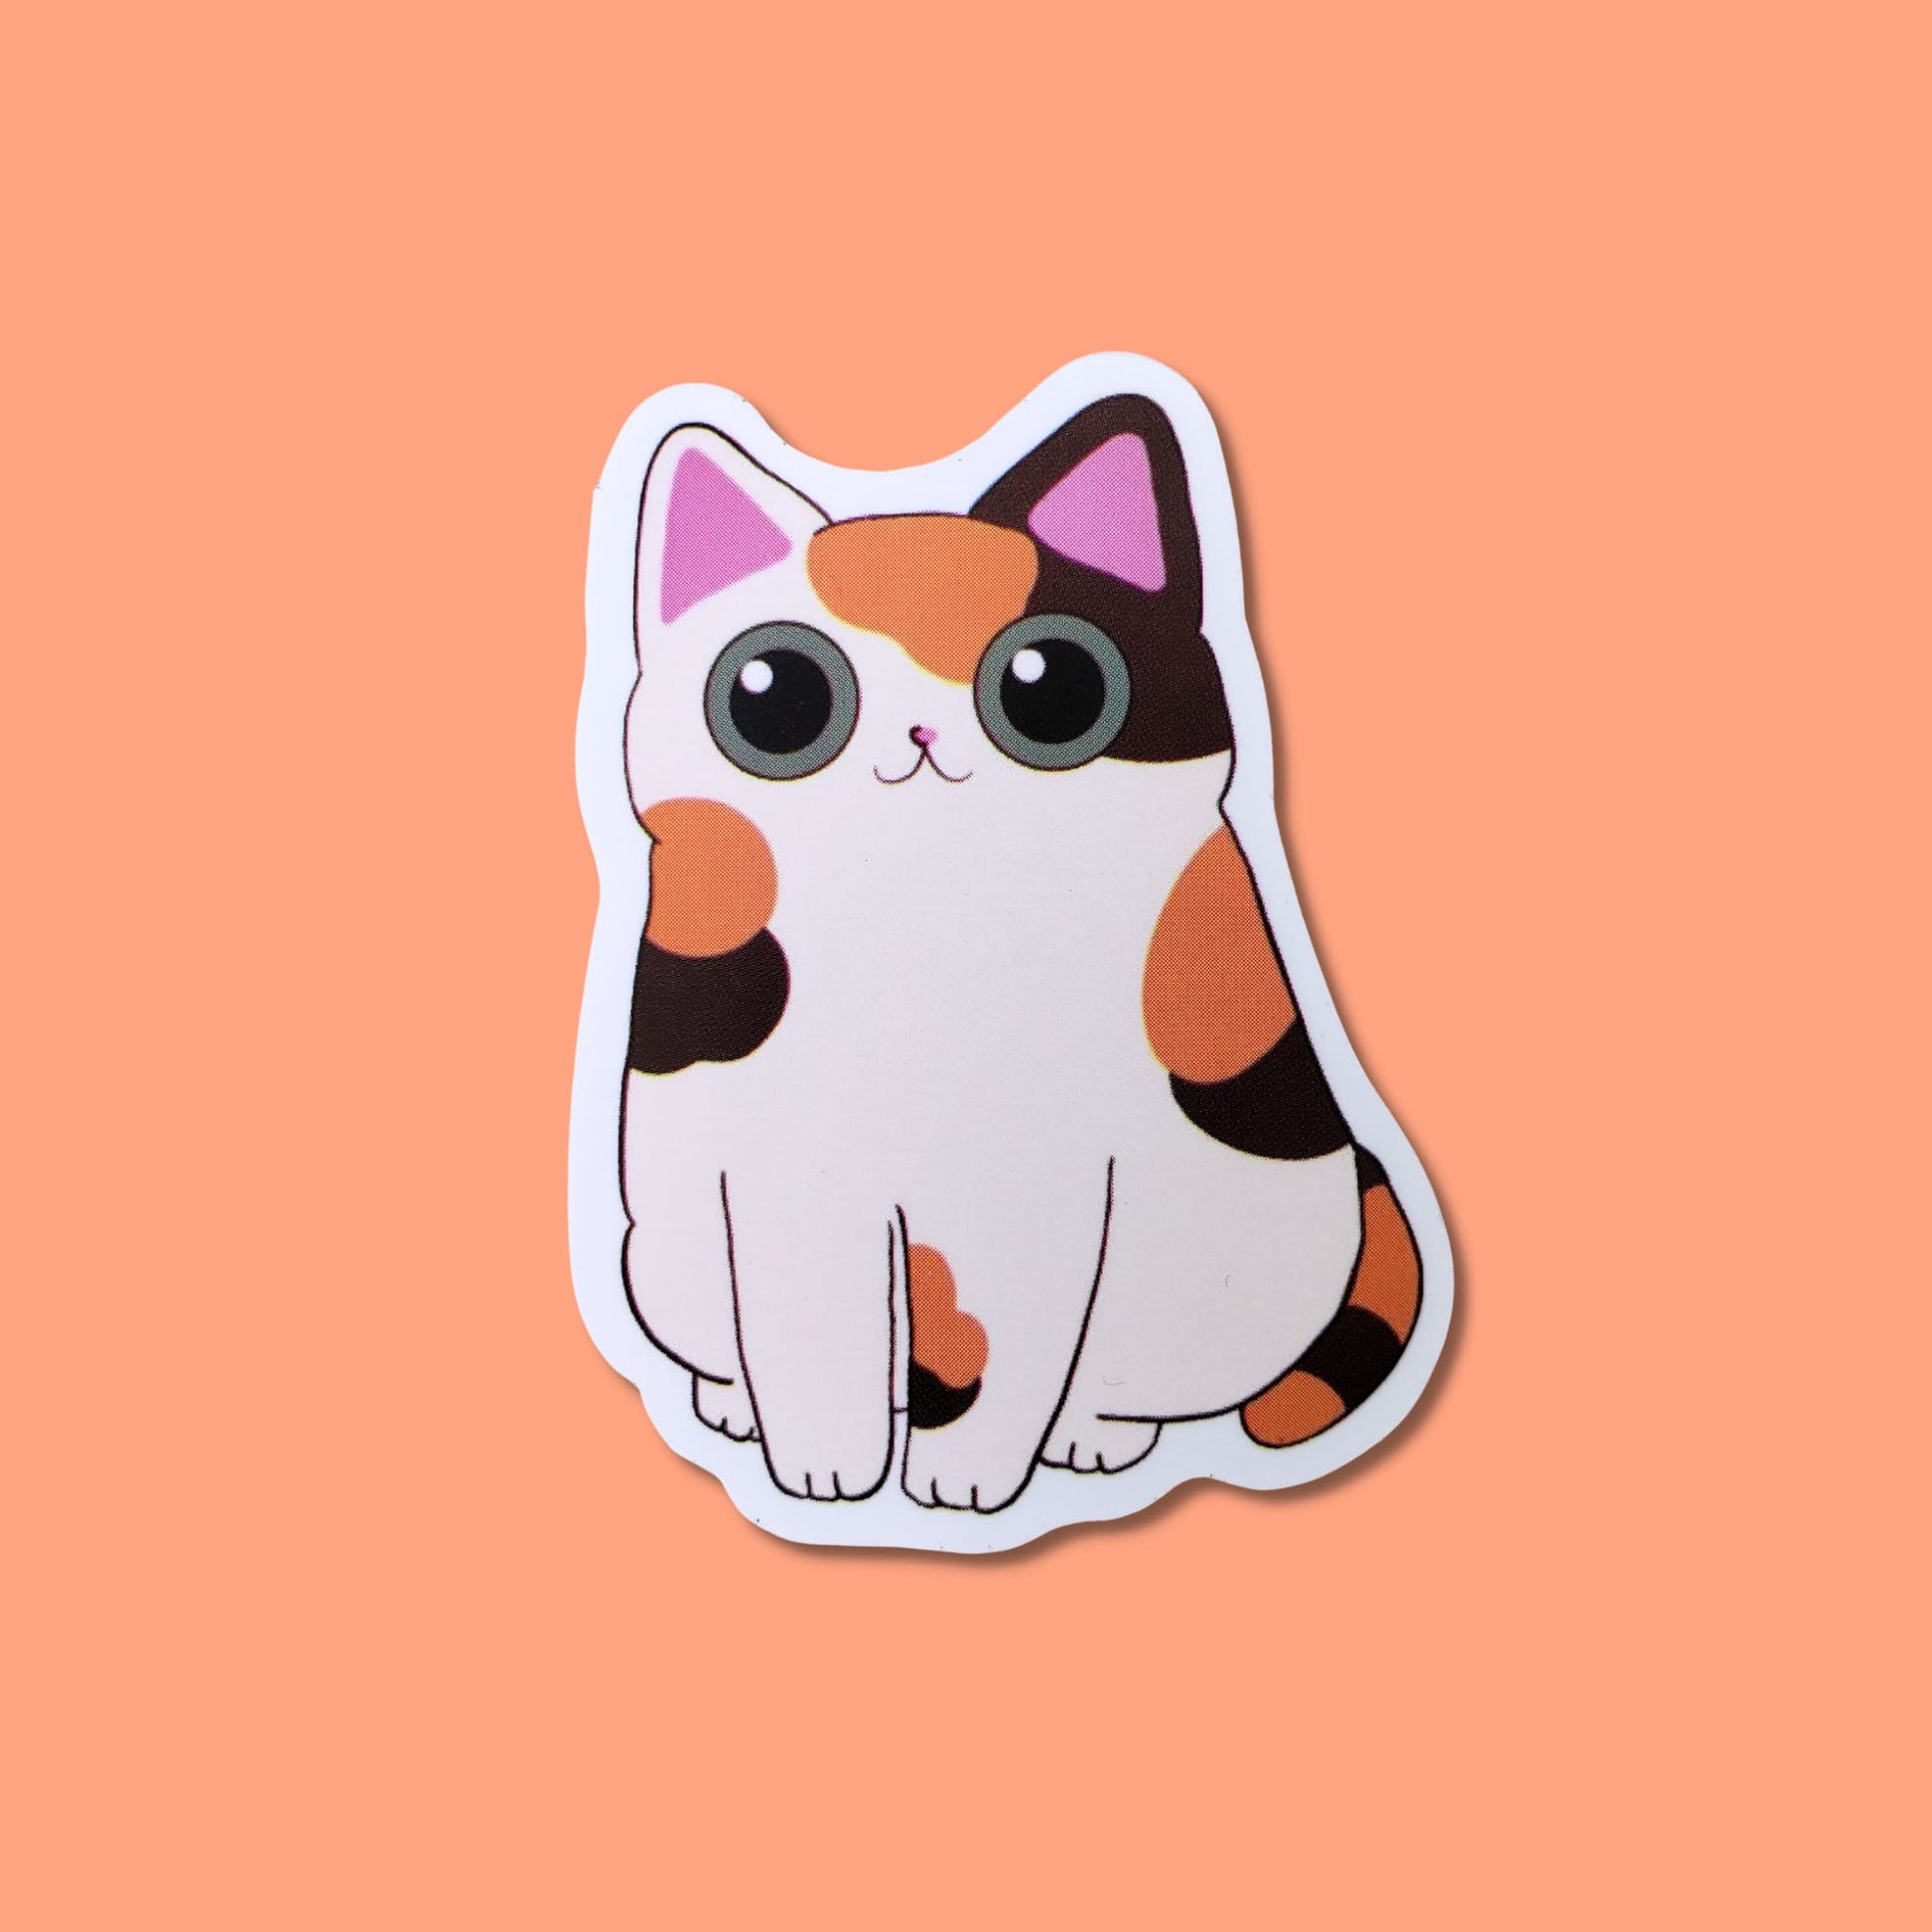 Big Eye Calico Waterproof Sticker | What Catnip from Confetti Kitty, Only 1.00